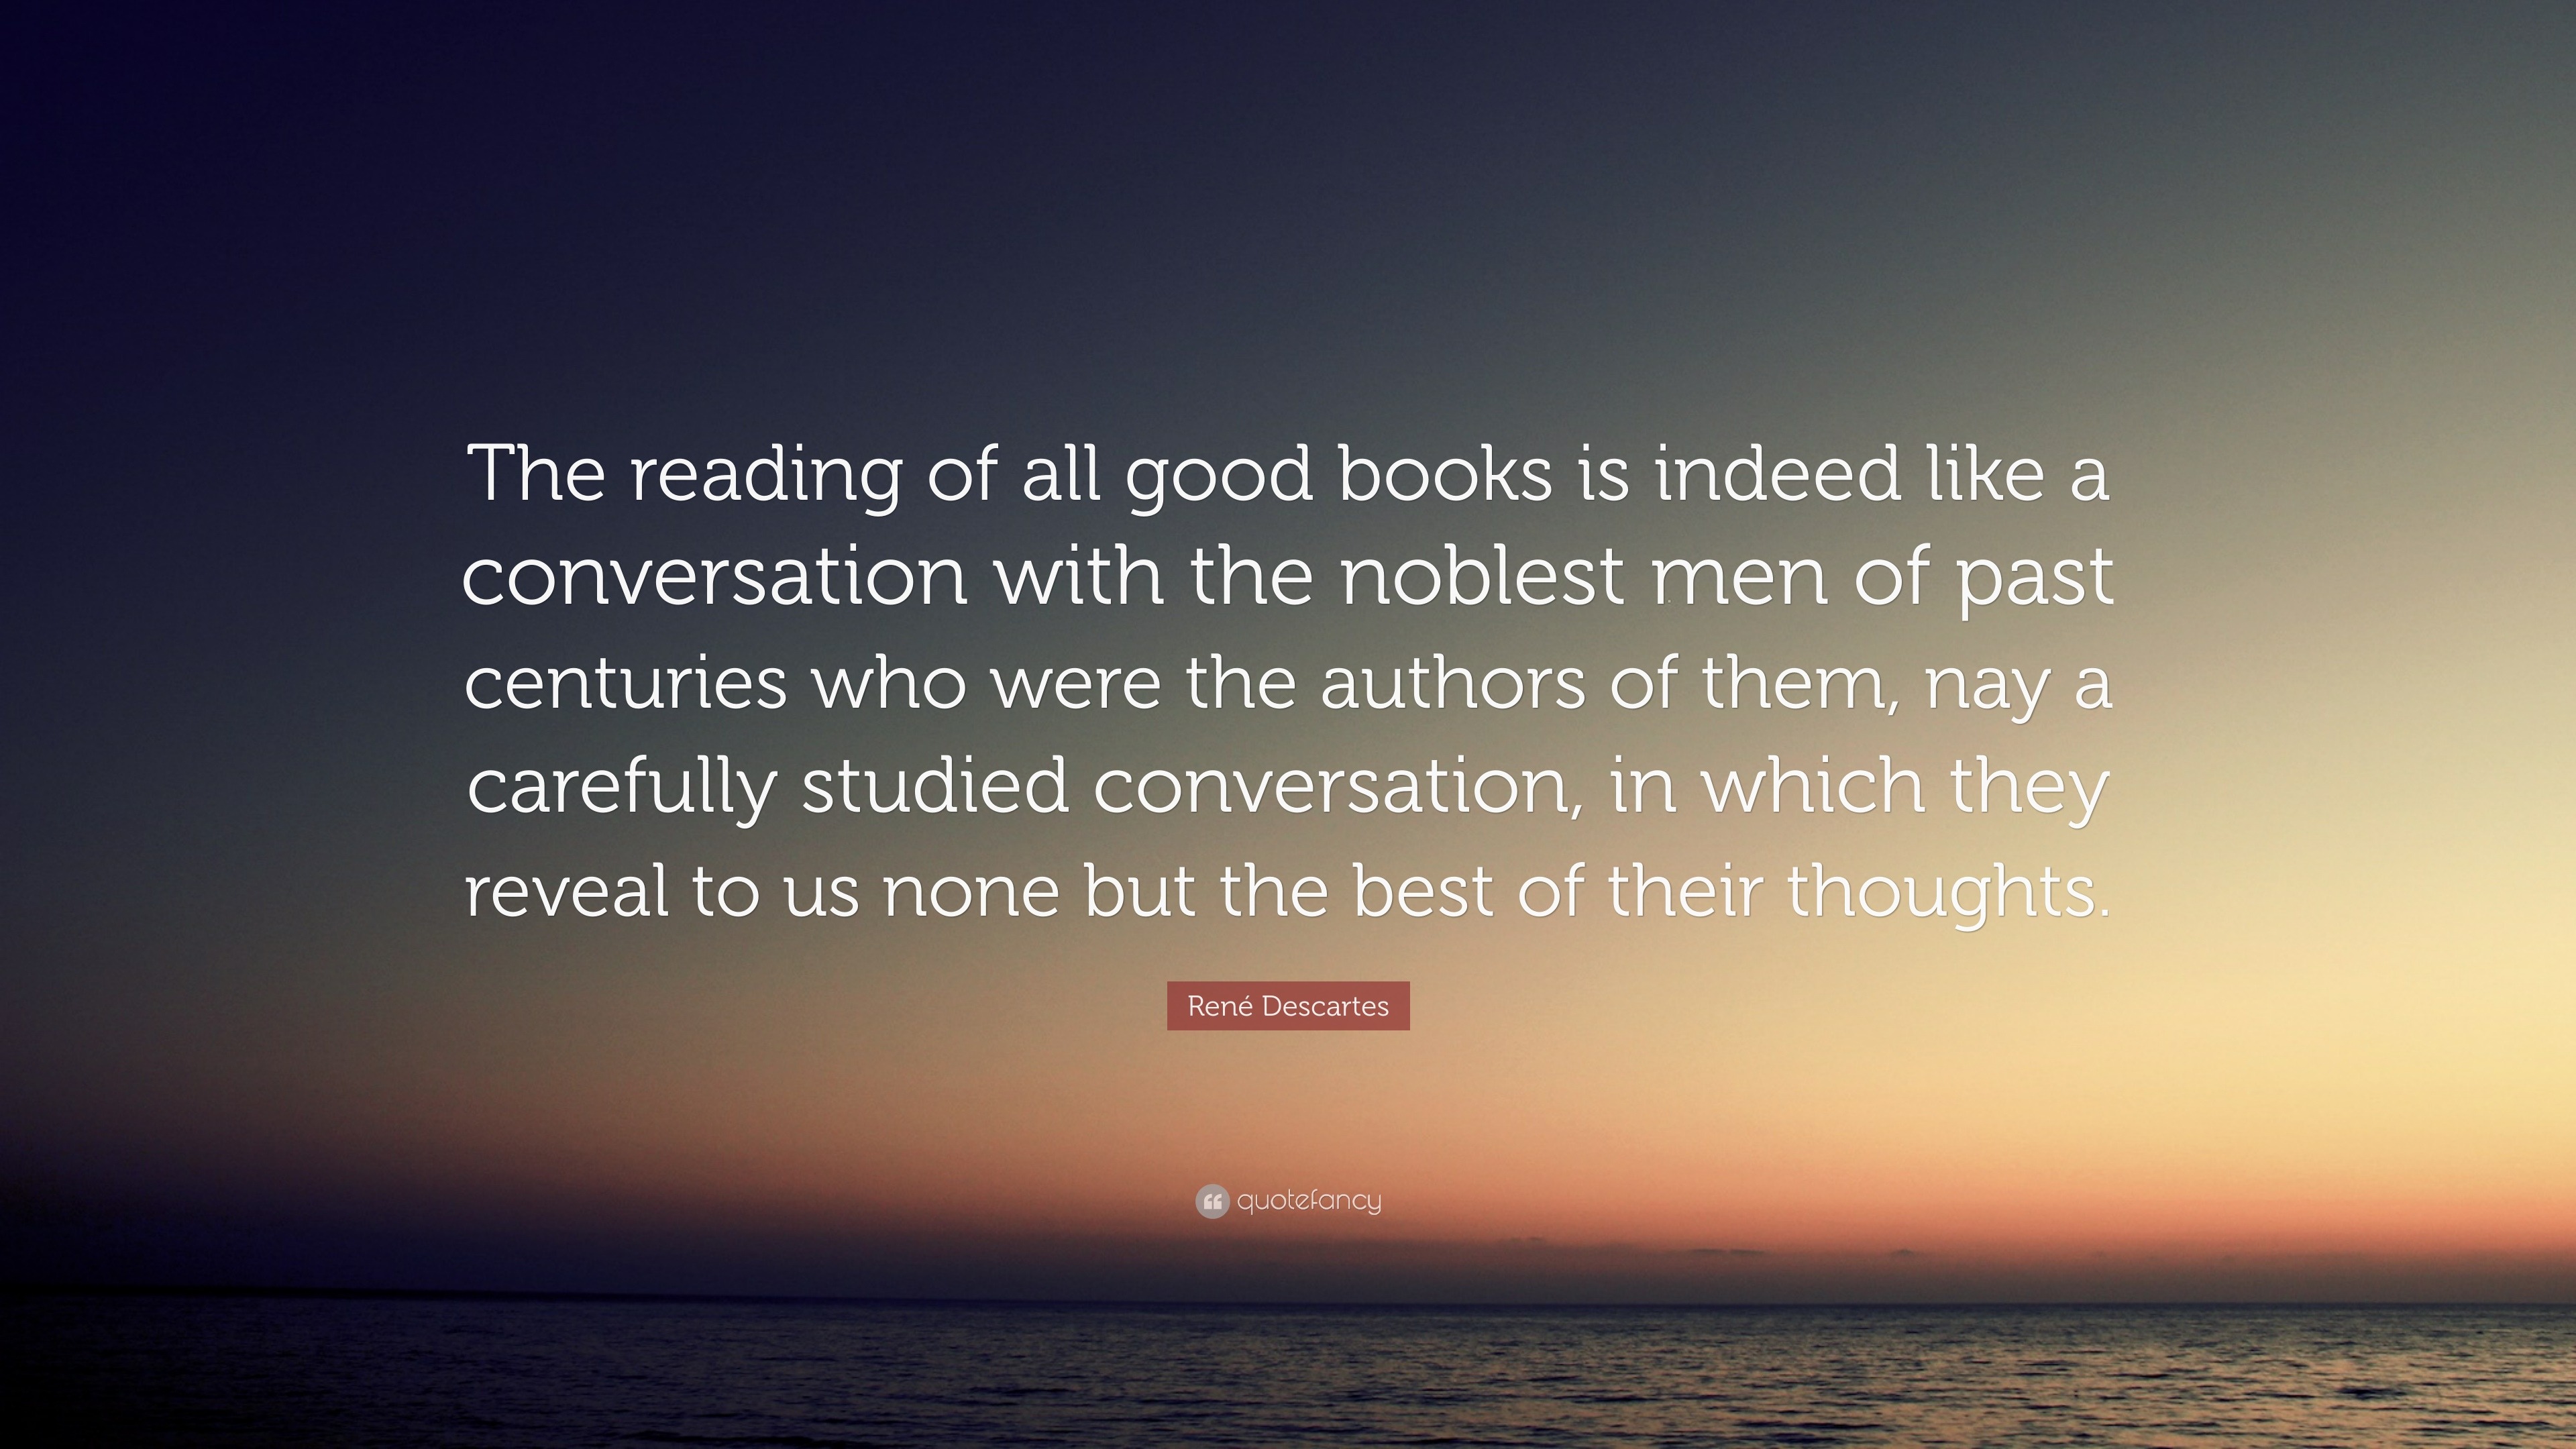 René Descartes Quote: “The reading of all good books is indeed like a ...